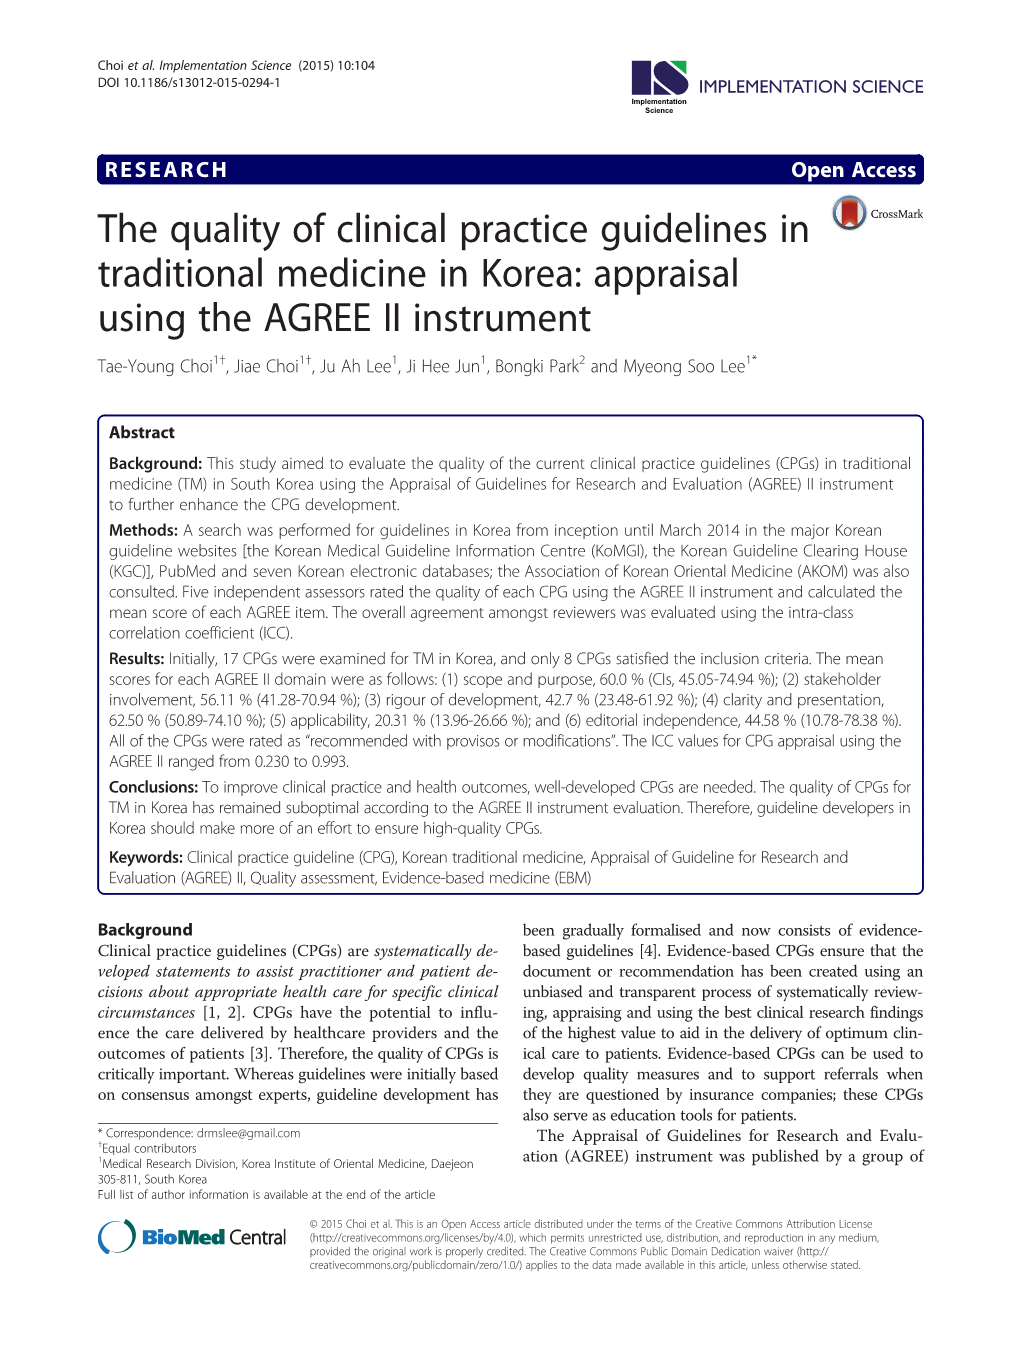 The Quality of Clinical Practice Guidelines in Traditional Medicine In